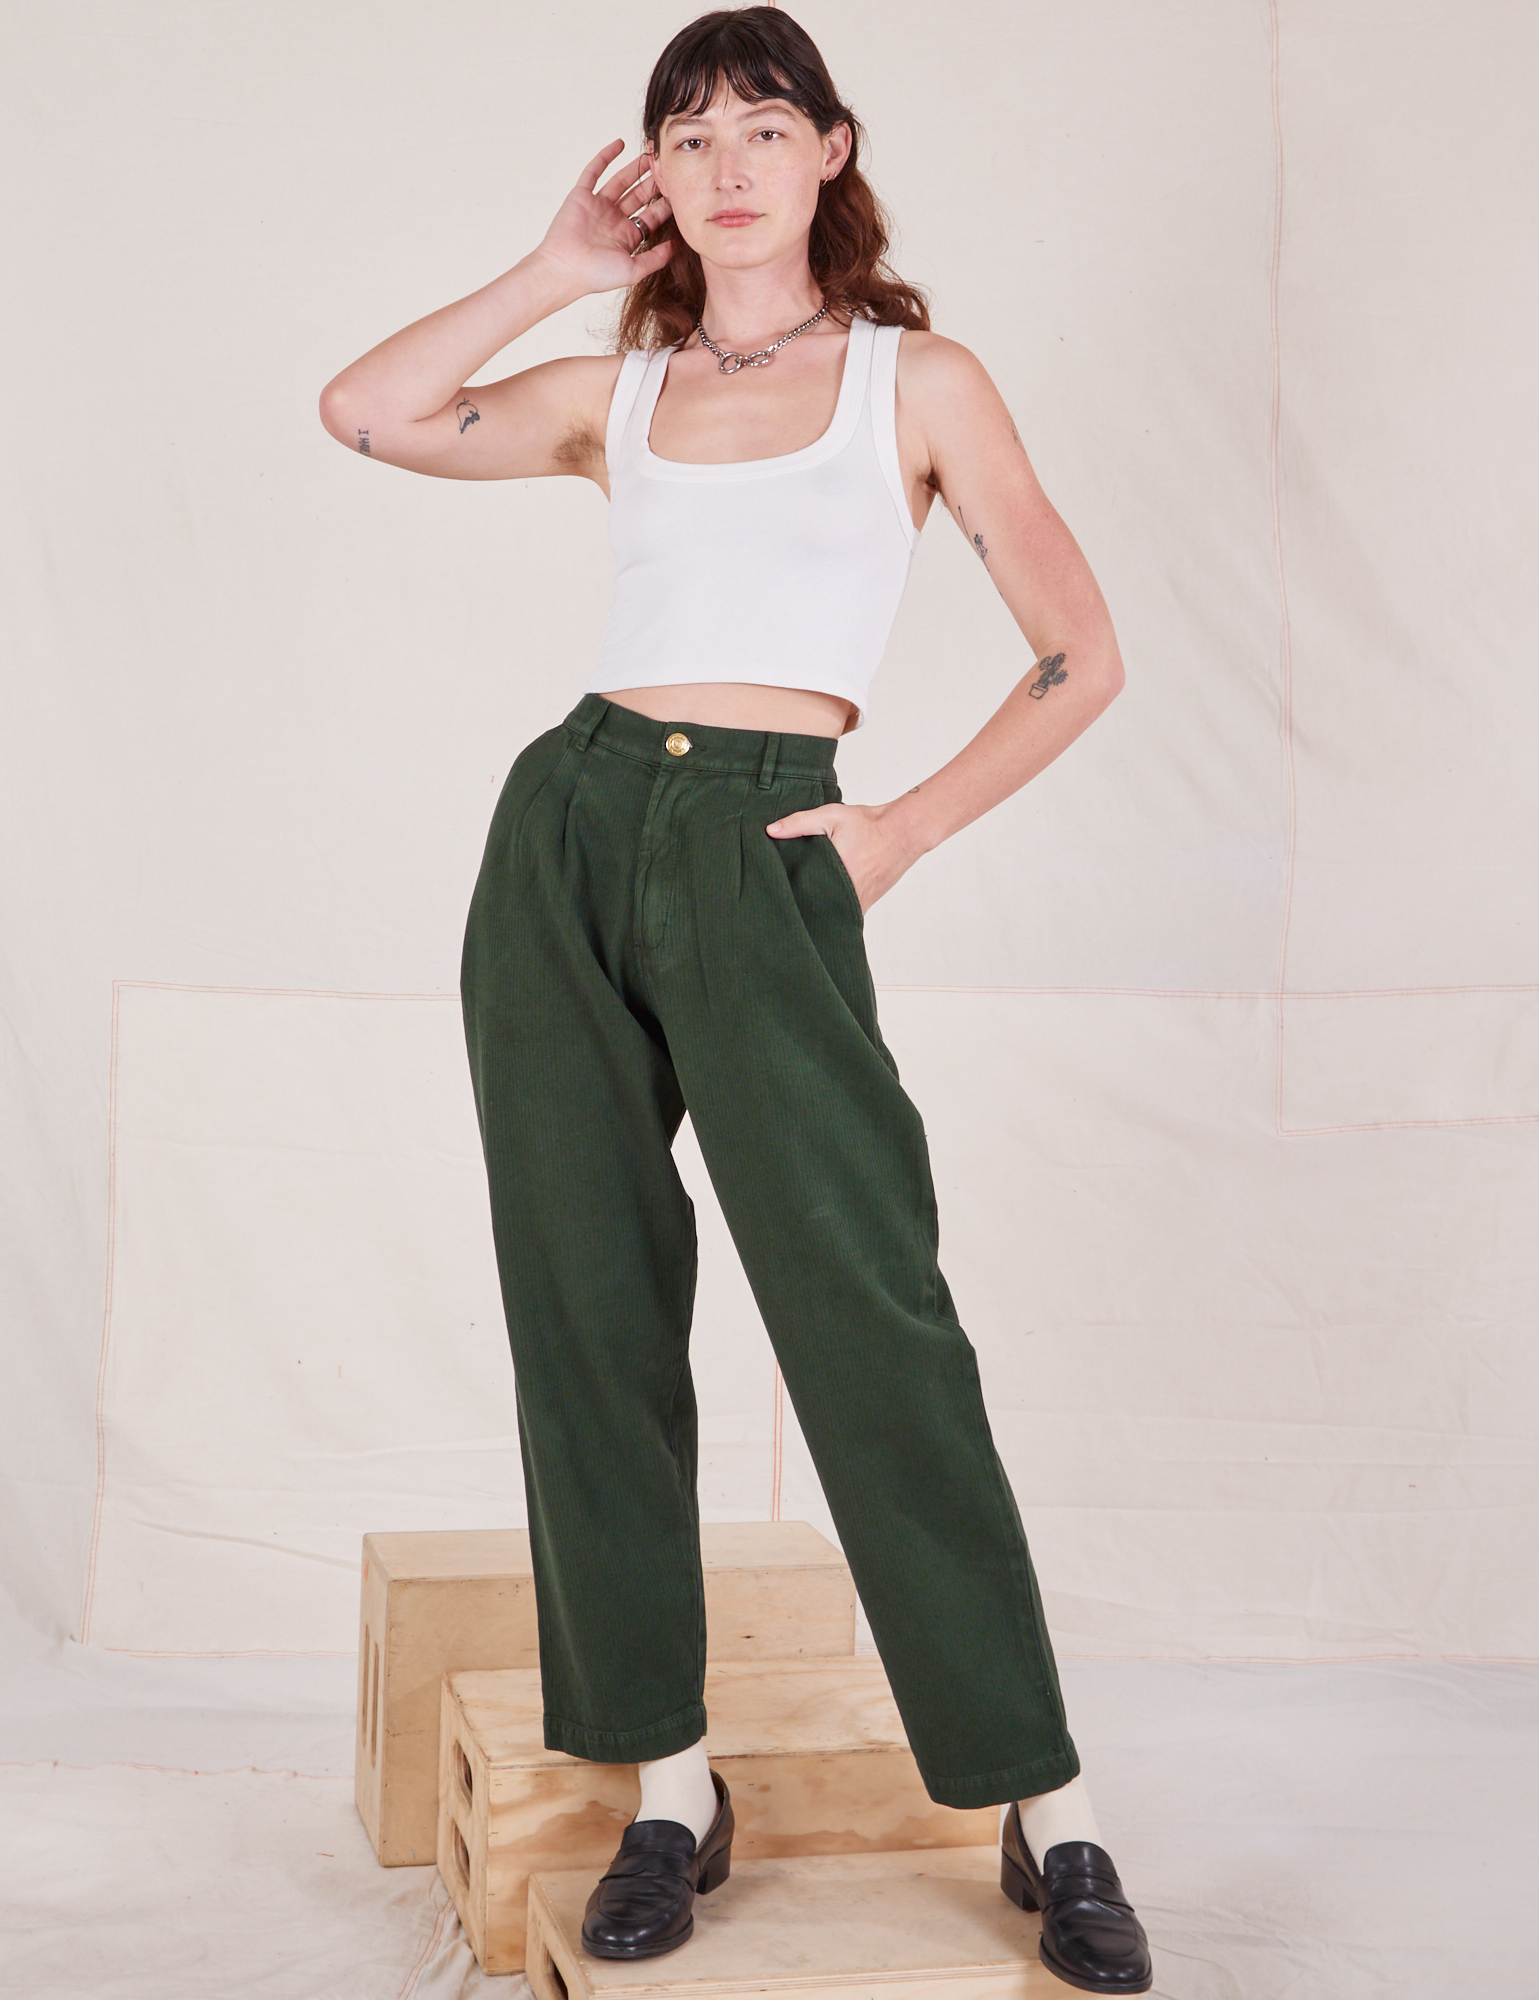 Alex is 5'8" and wearing XXS Heritage Trousers in Swamp Green paired with Cropped Tank Top in vintage tee off-white